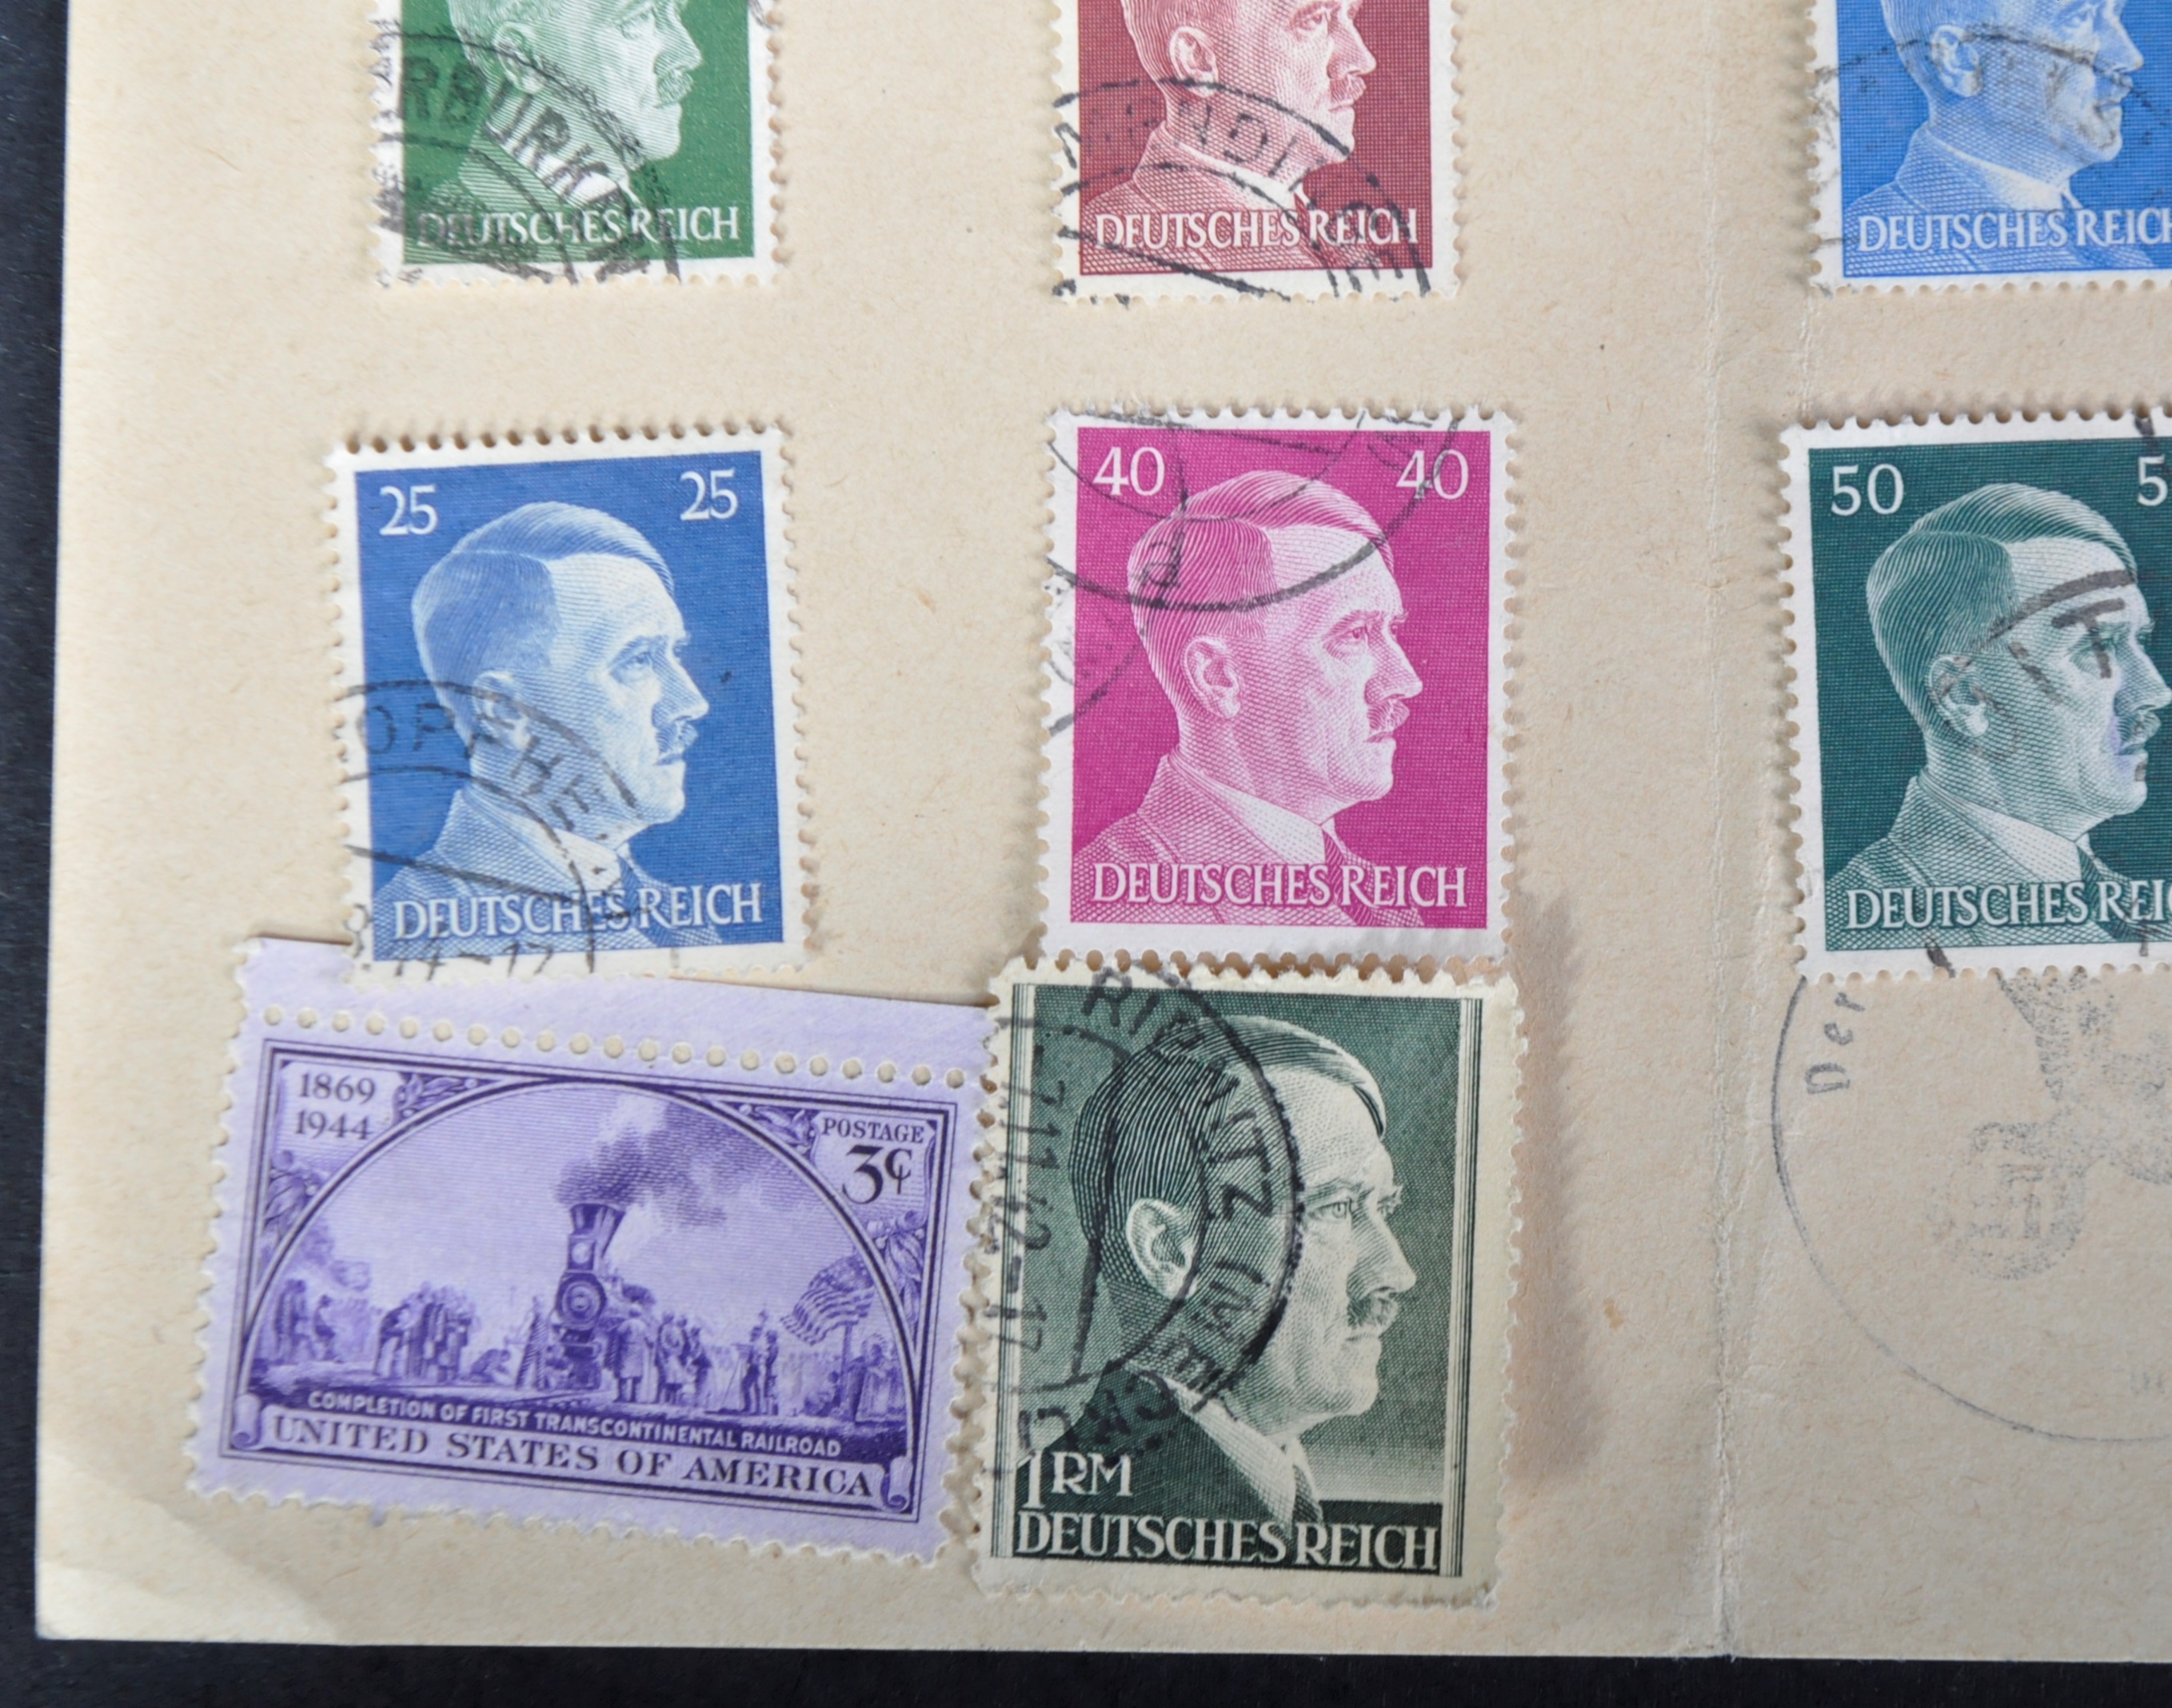 COLLECTION OF PRE-WWII ADOLF HITLER THIRD REICH STAMPS - Image 2 of 3